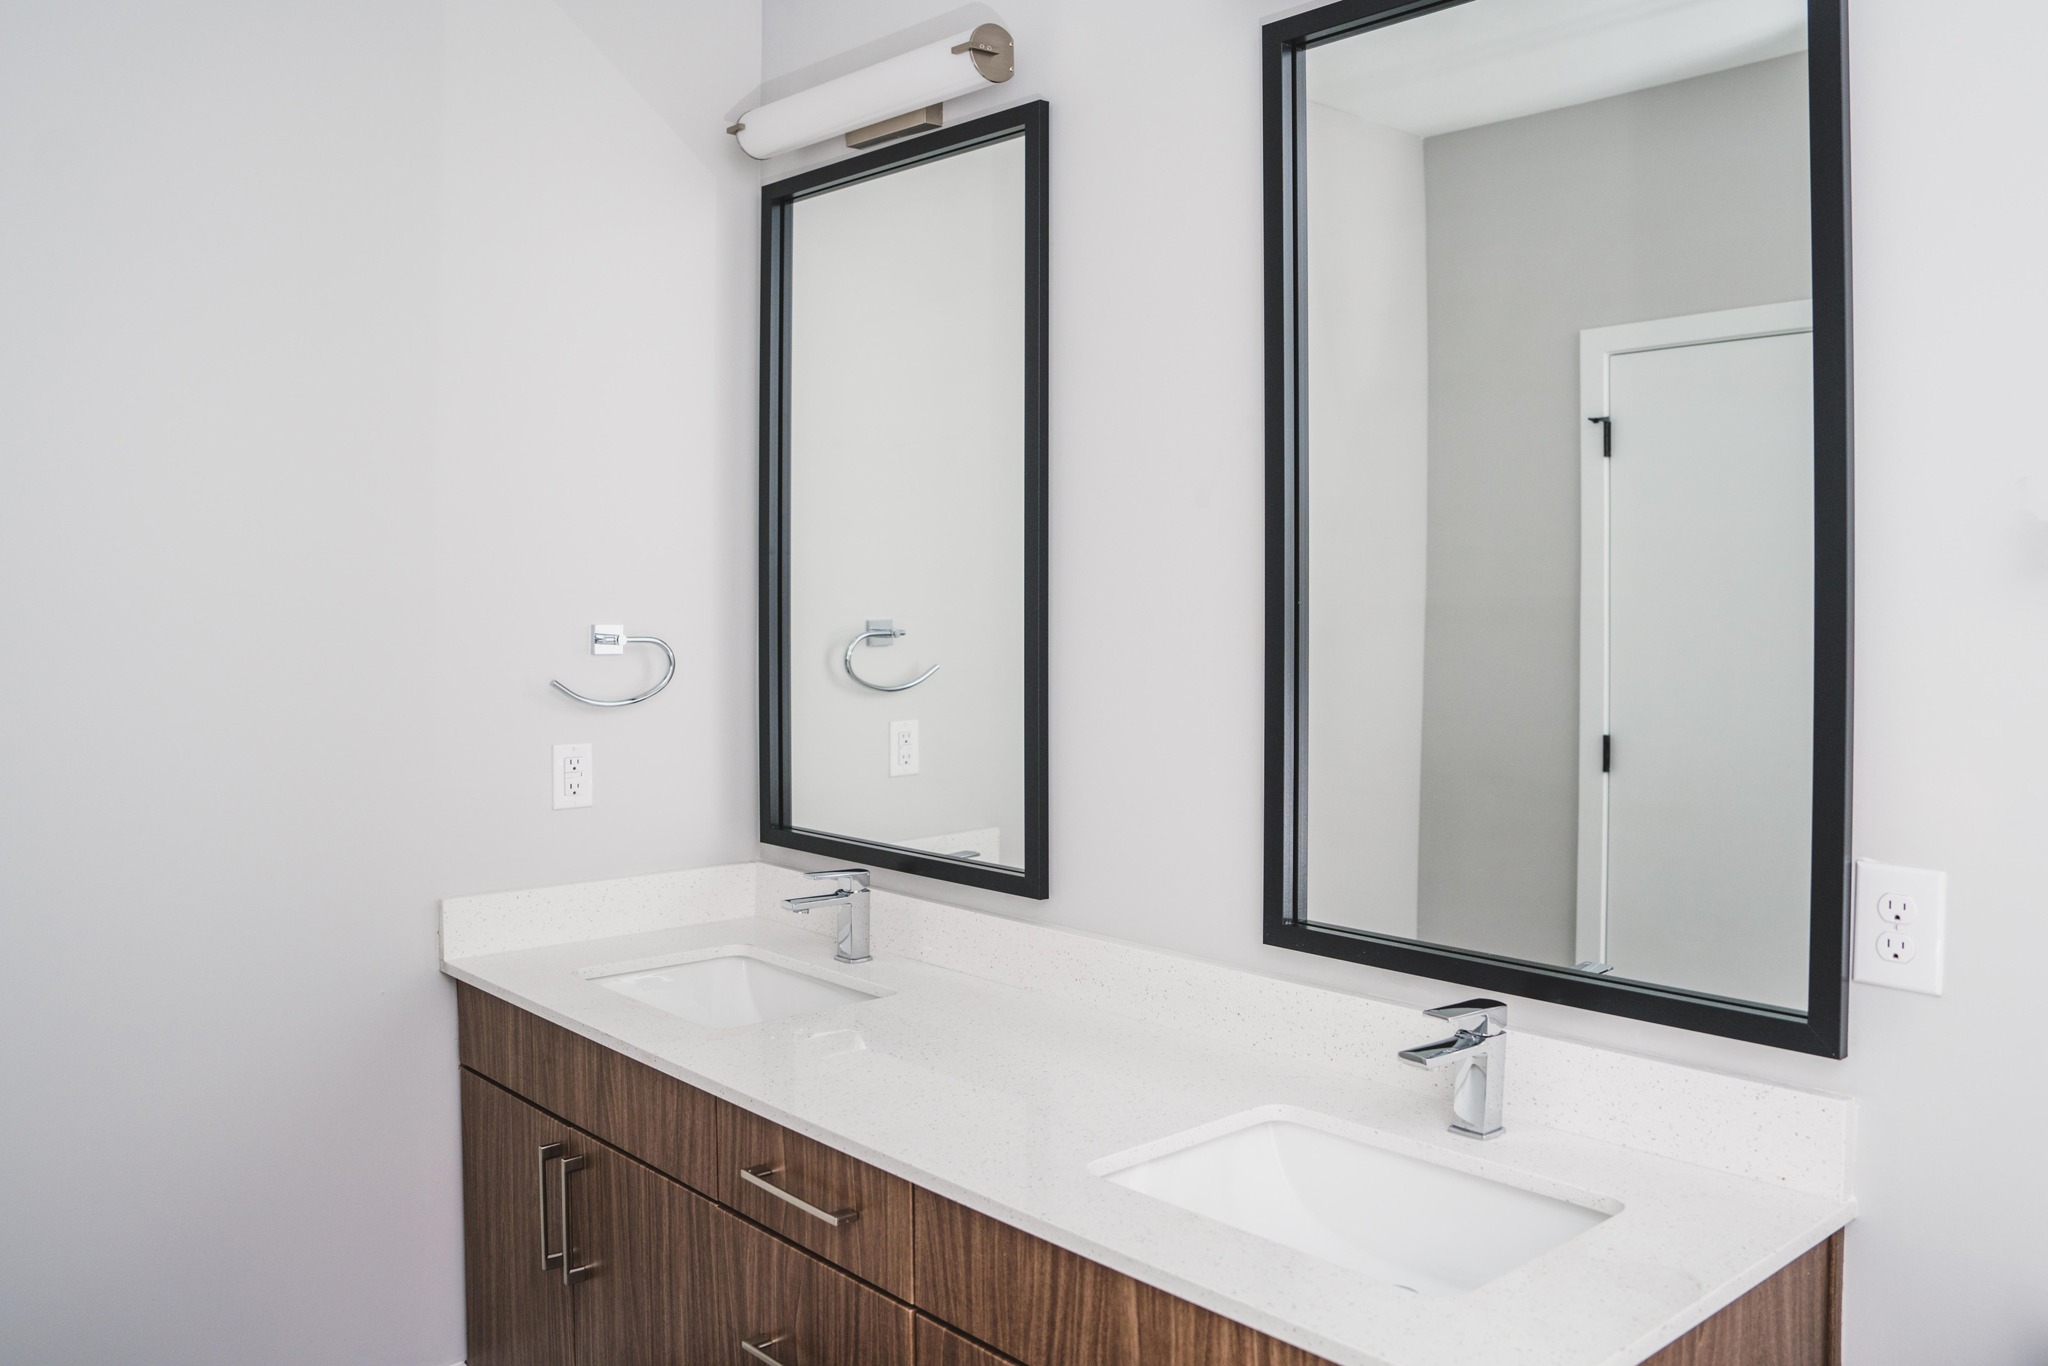 double vanity bathroom at modera germantown apartment homes for rent in nashville tennessee